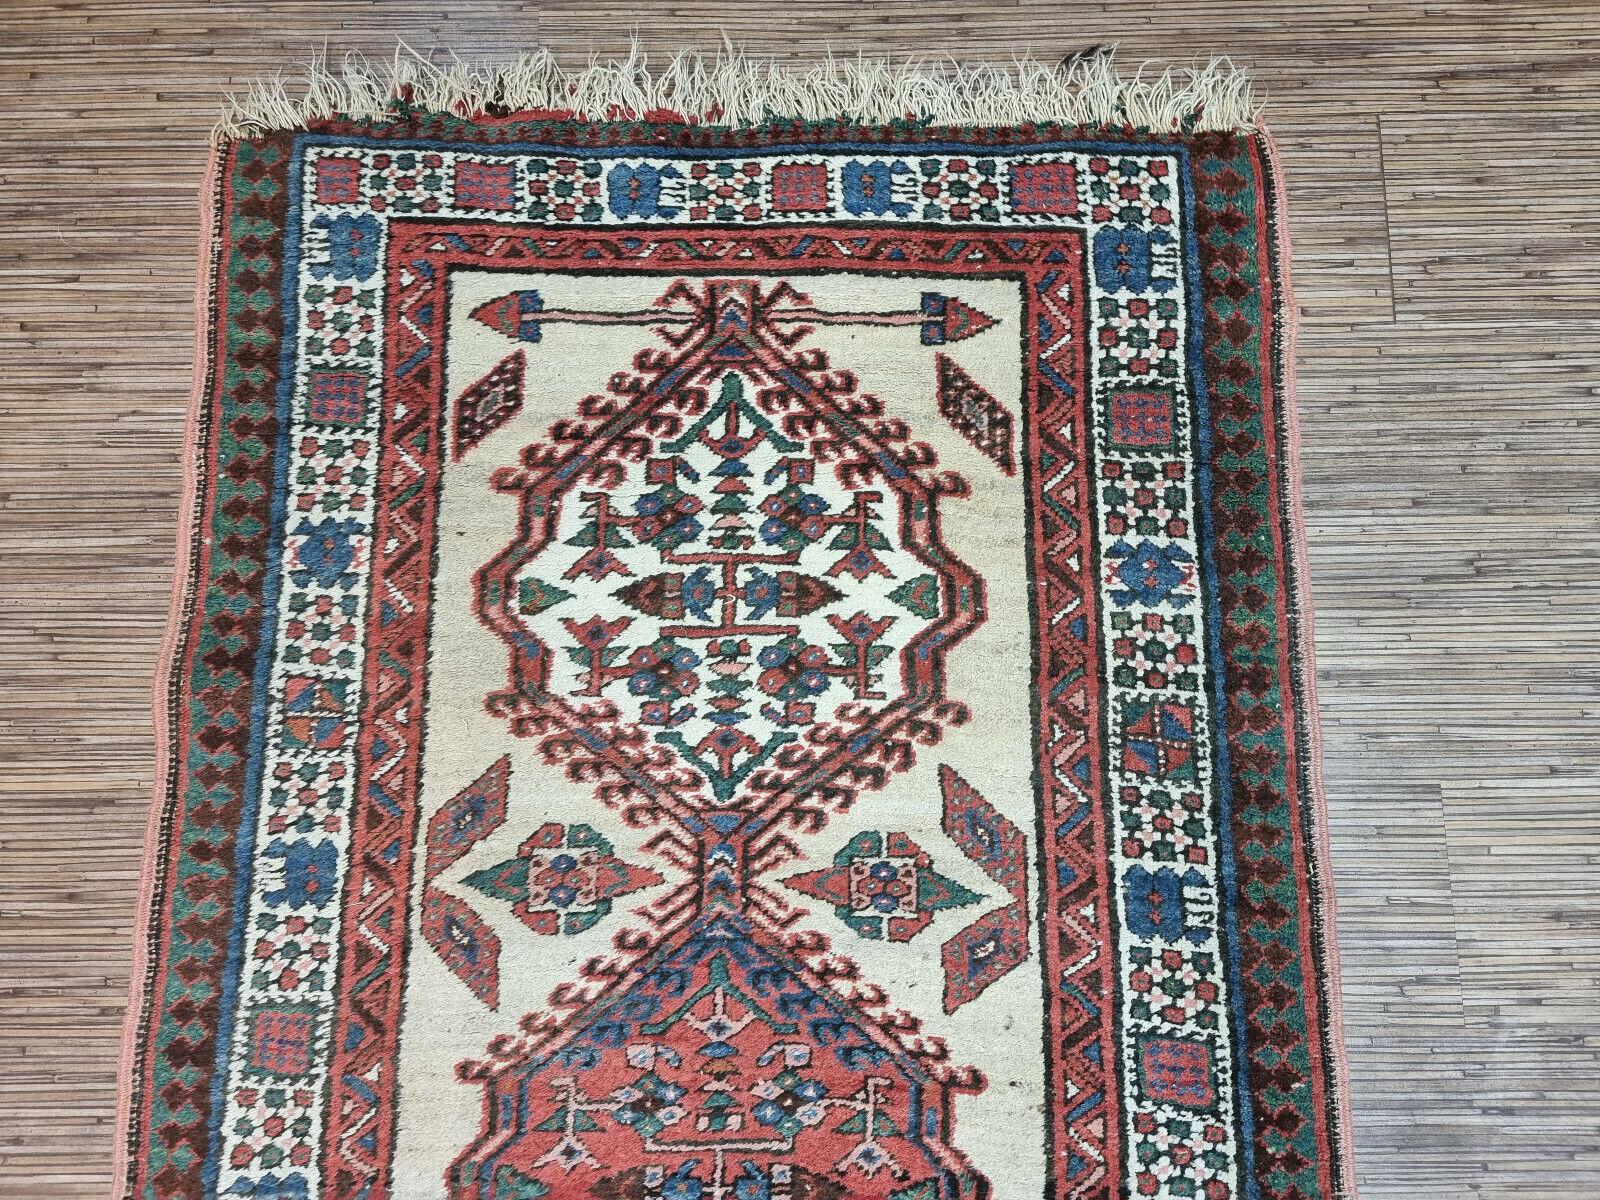 Early 20th Century Handmade Antique Persian Style Serab Runner Rug 3.2' x 14.9', 1900s - 1D101 For Sale